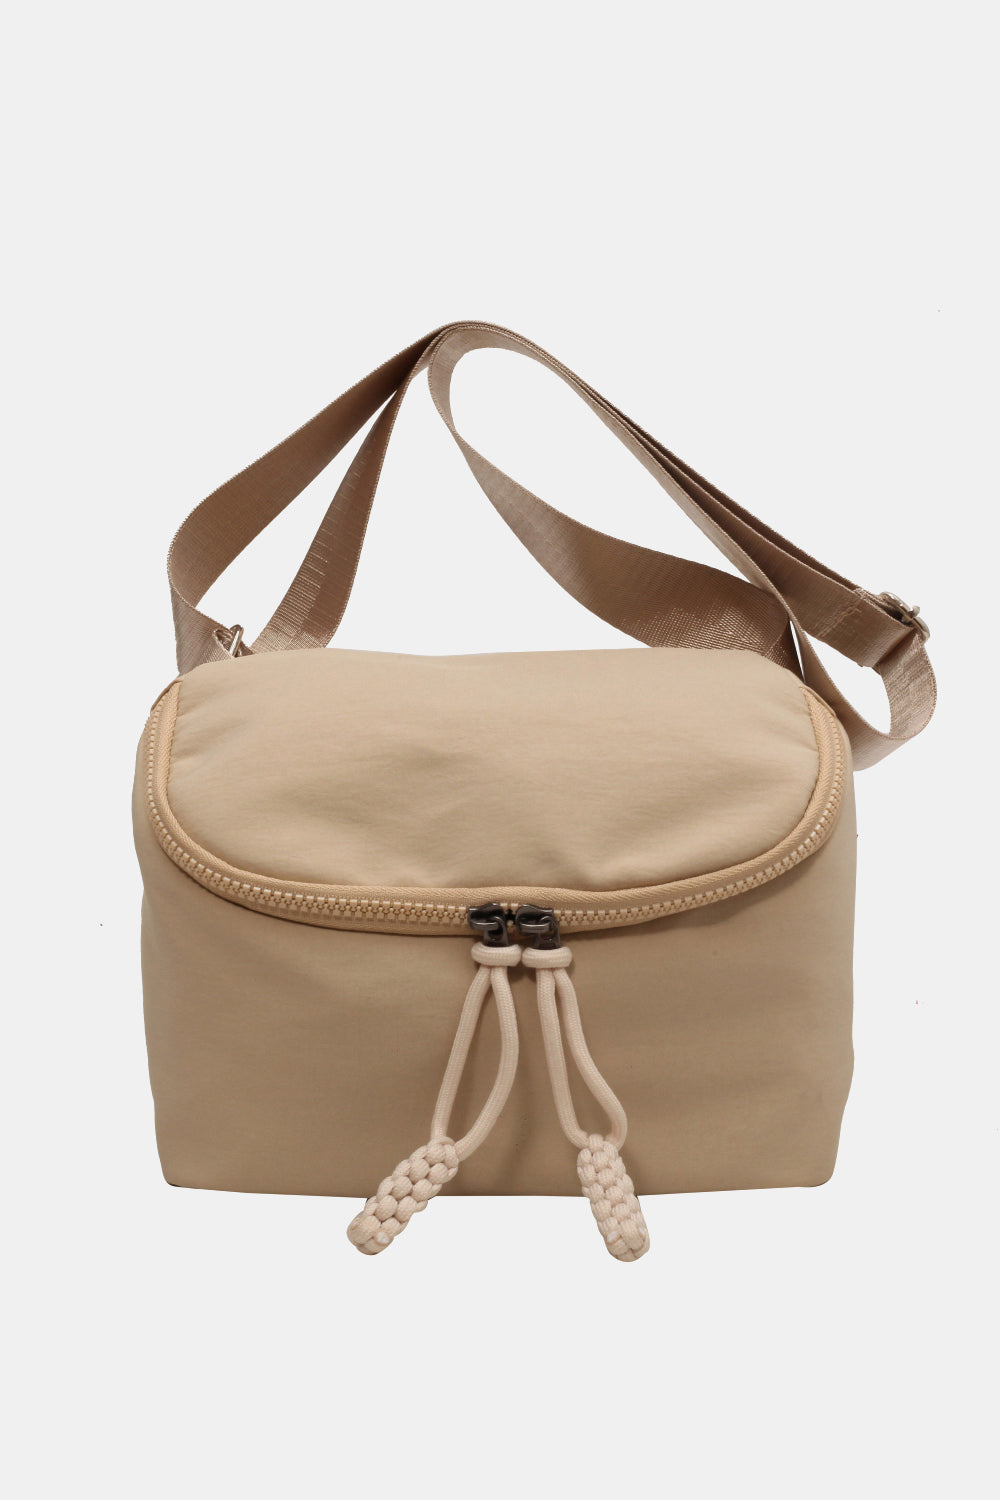 Medium Nylon Sling Bag Available in Several Colors